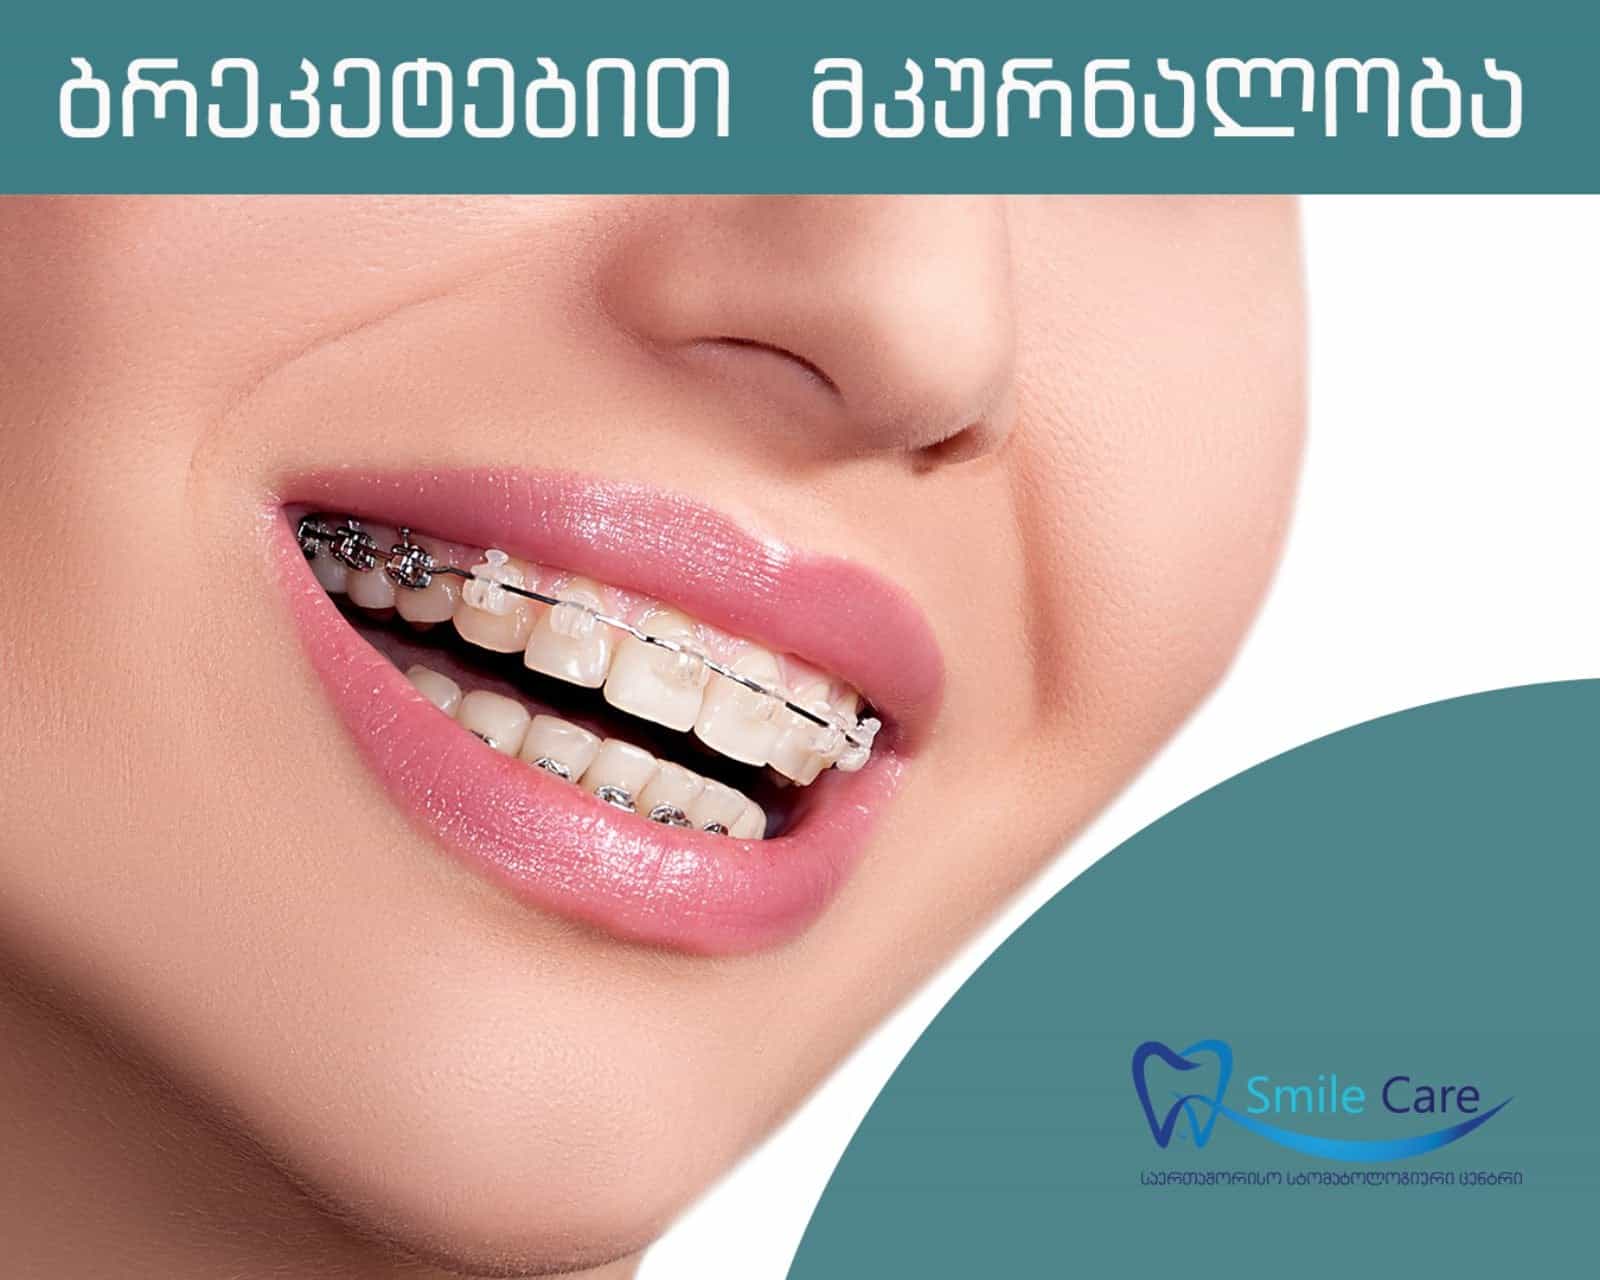 Treatment with braces